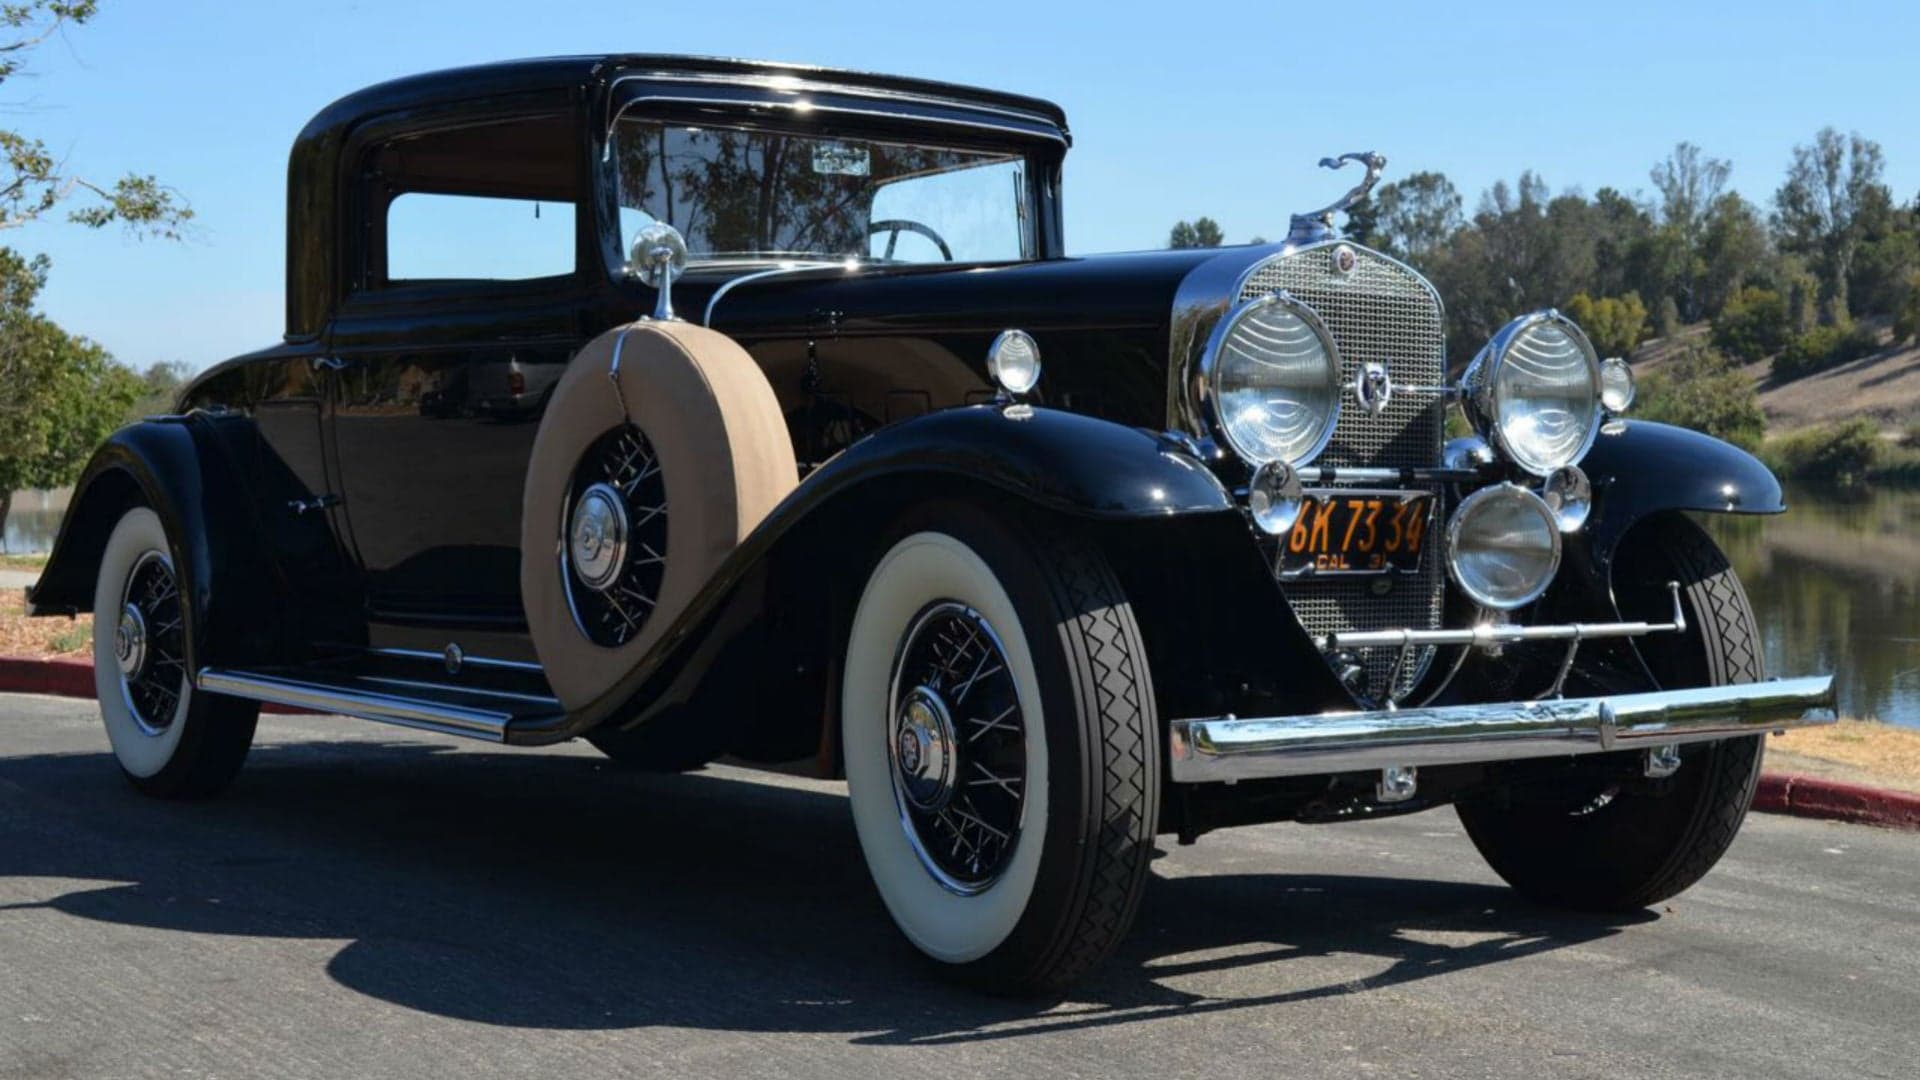 This Beautiful 1931 Cadillac V12 Coupe for Sale Is One of Four